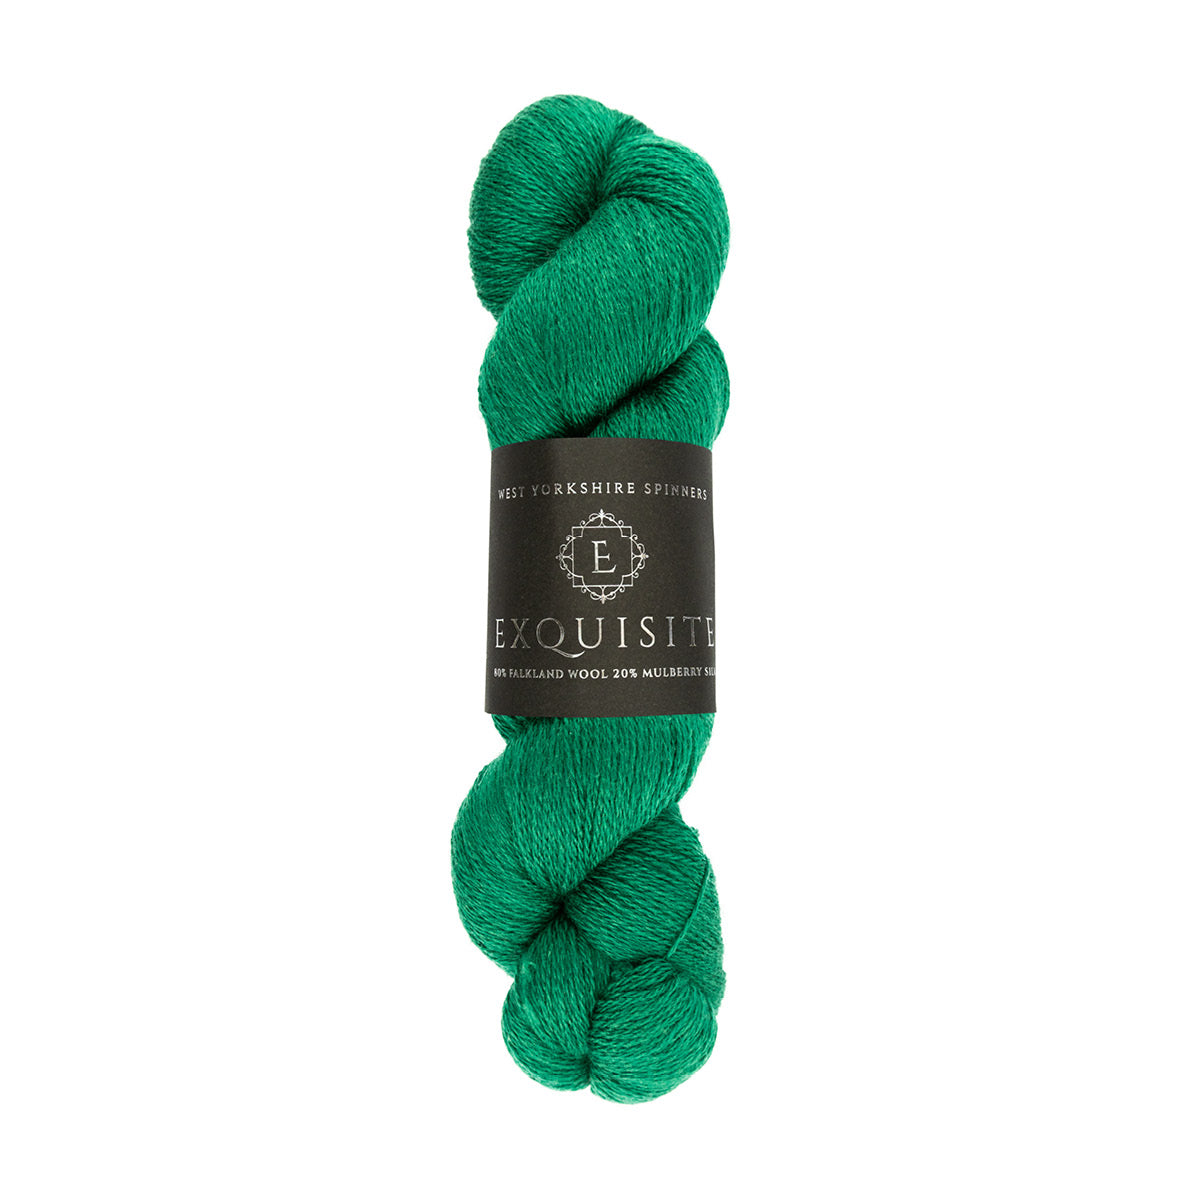 WYS West Yorkshire Spinners Exquisite Lace hank or skein in bright green shade emerald 388